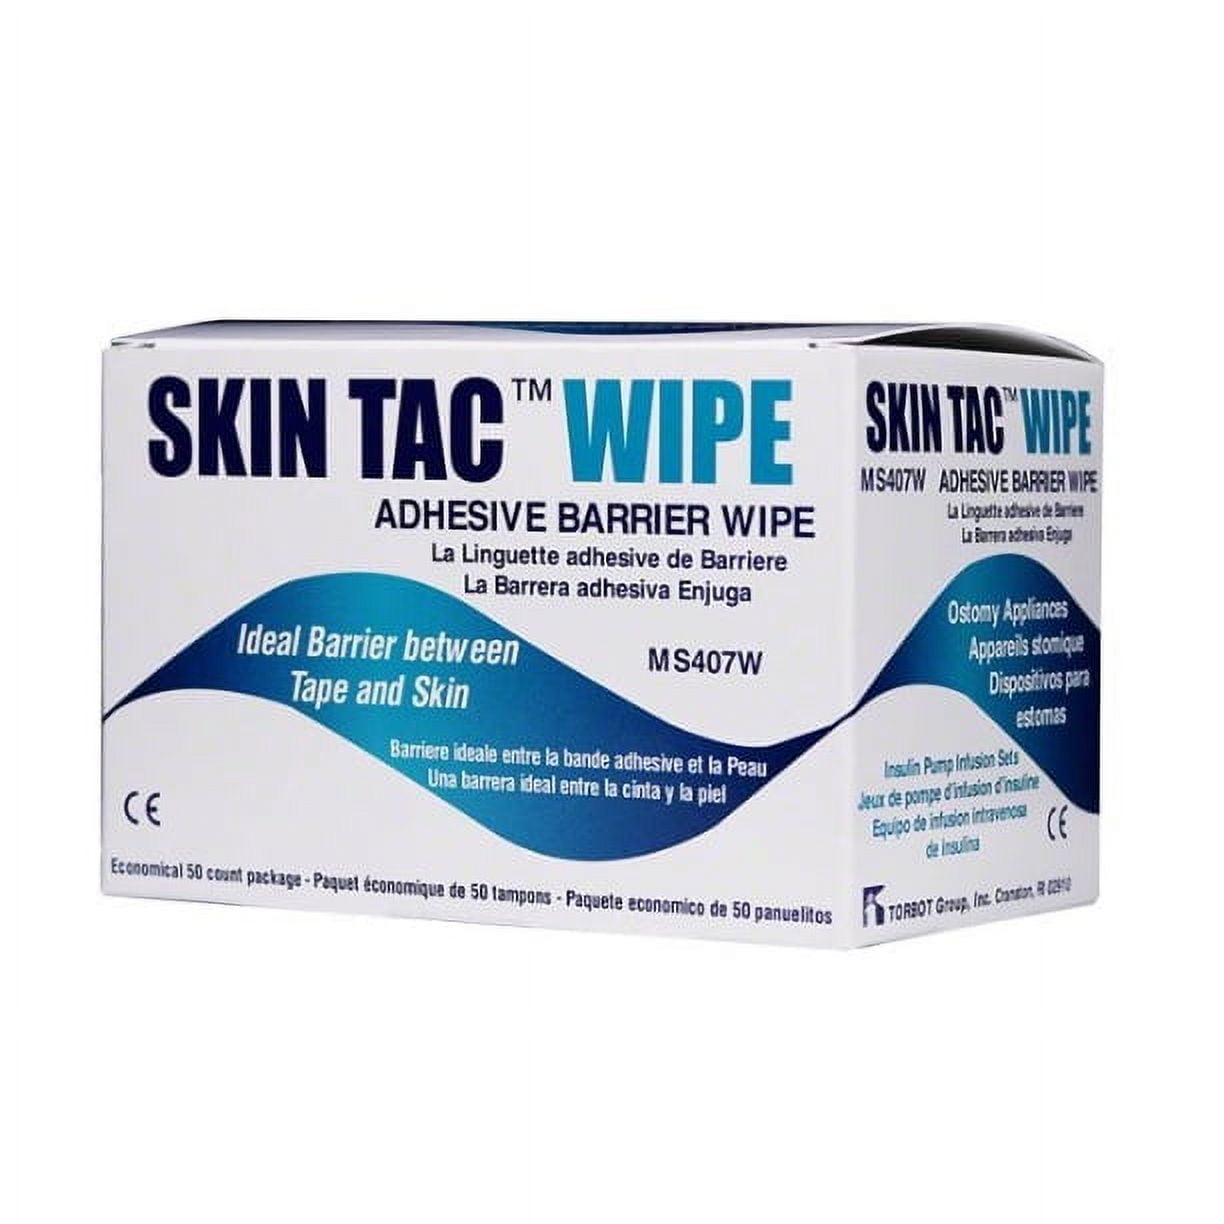 Skin Tac Wipes Review, Better Than Medical Tape